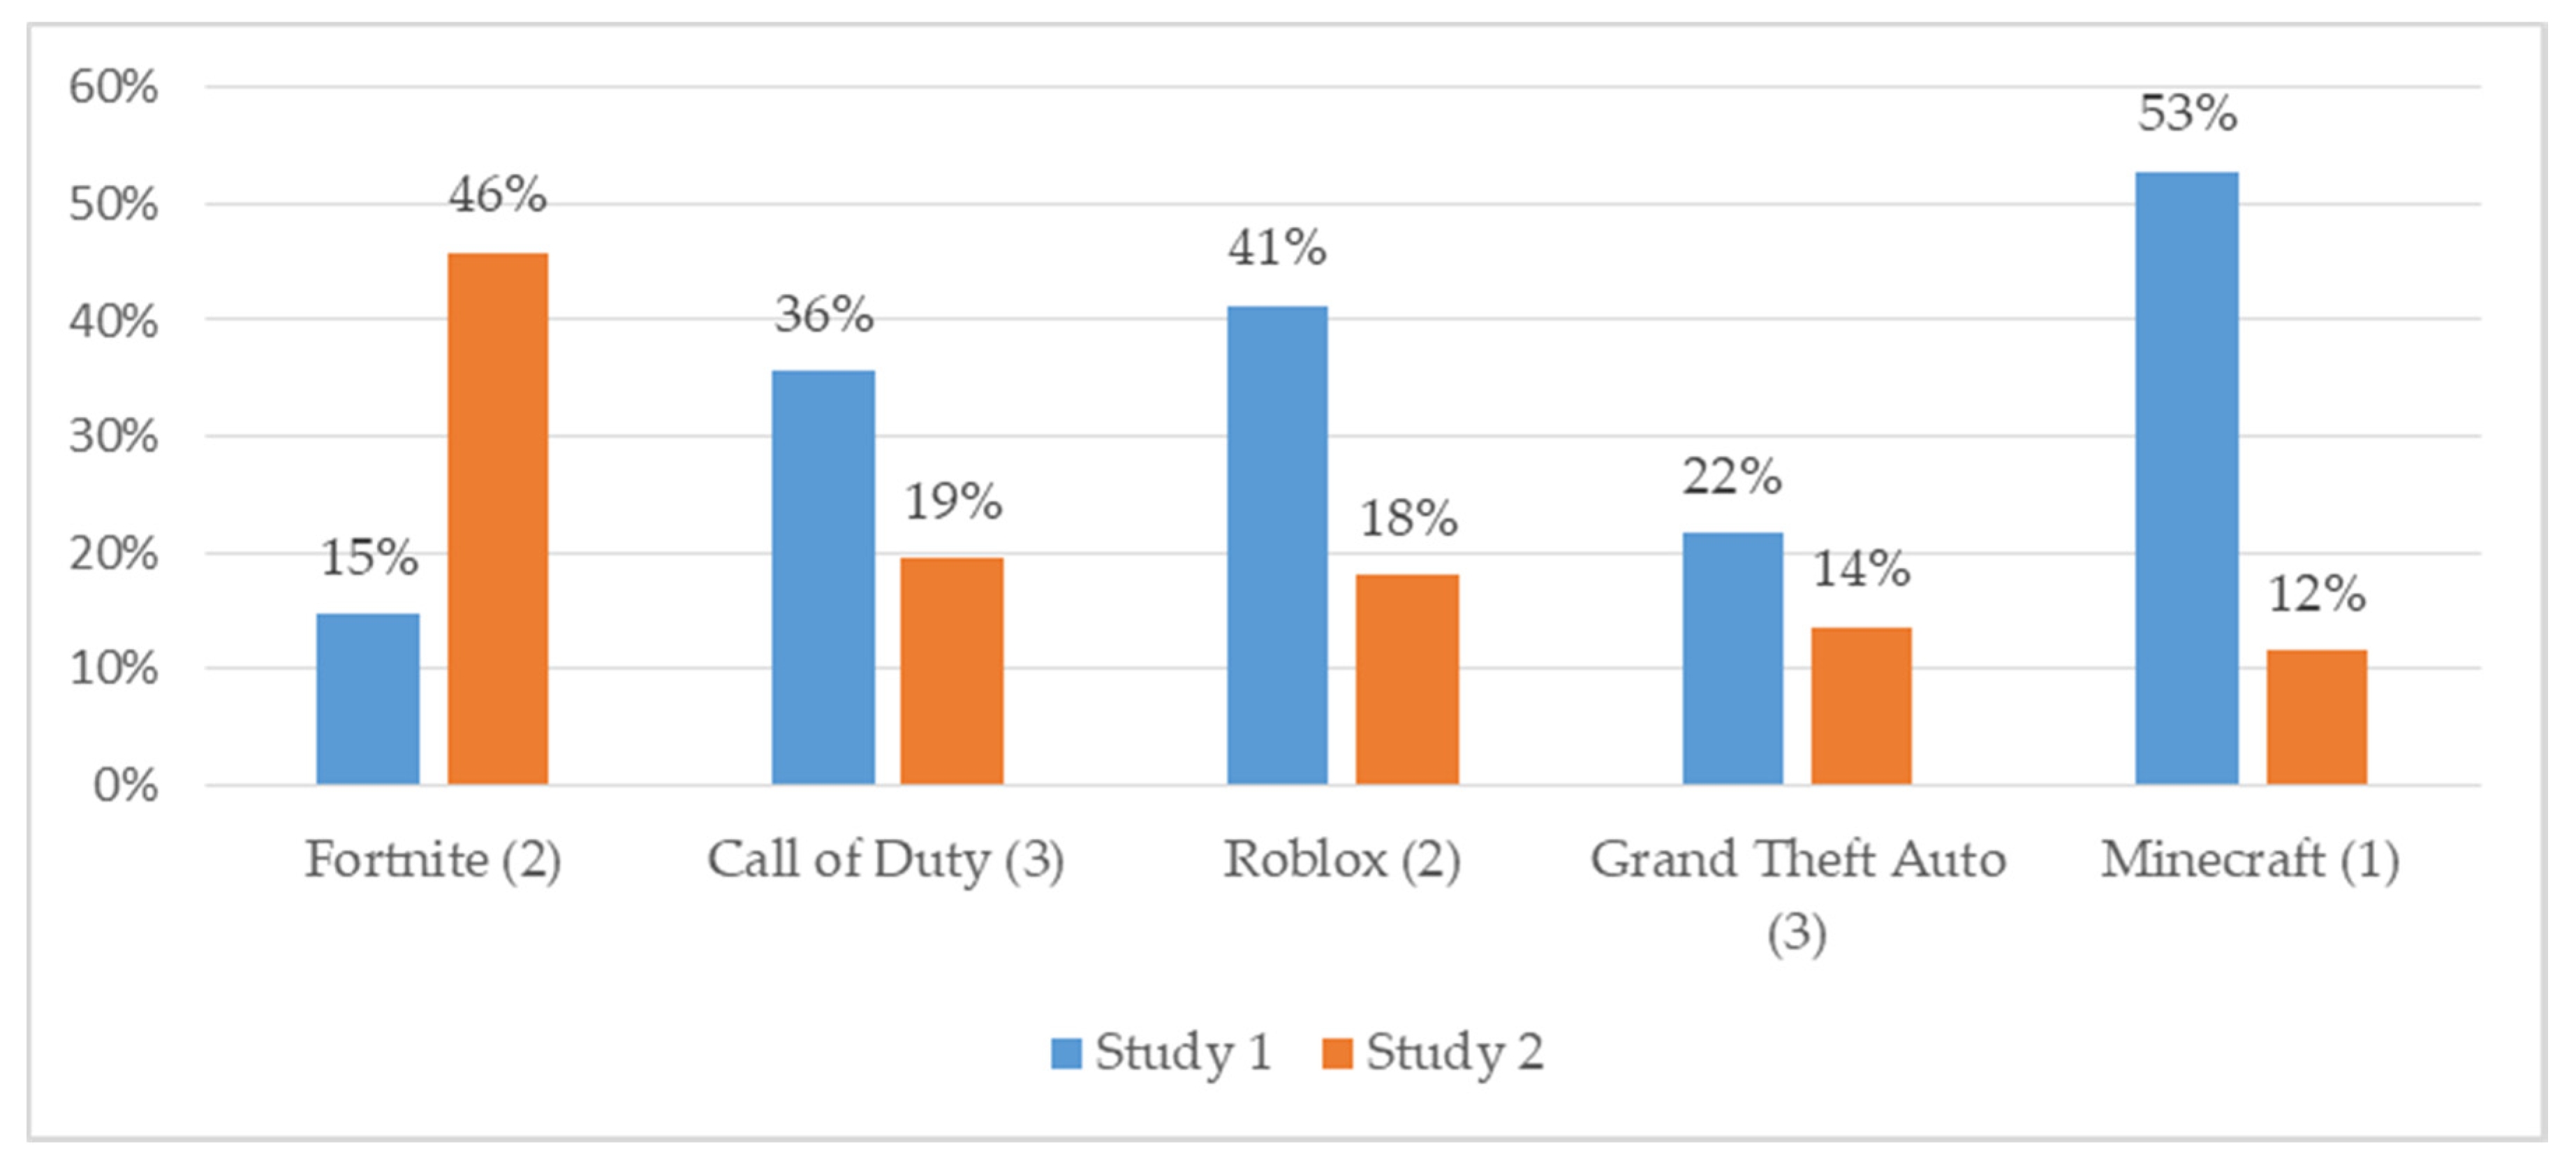 Ijerph Free Full Text Social And Behavioral Health Factors Associated With Violent And Mature Gaming In Early Adolescence Html - roblox project pokemon route 1 birds view